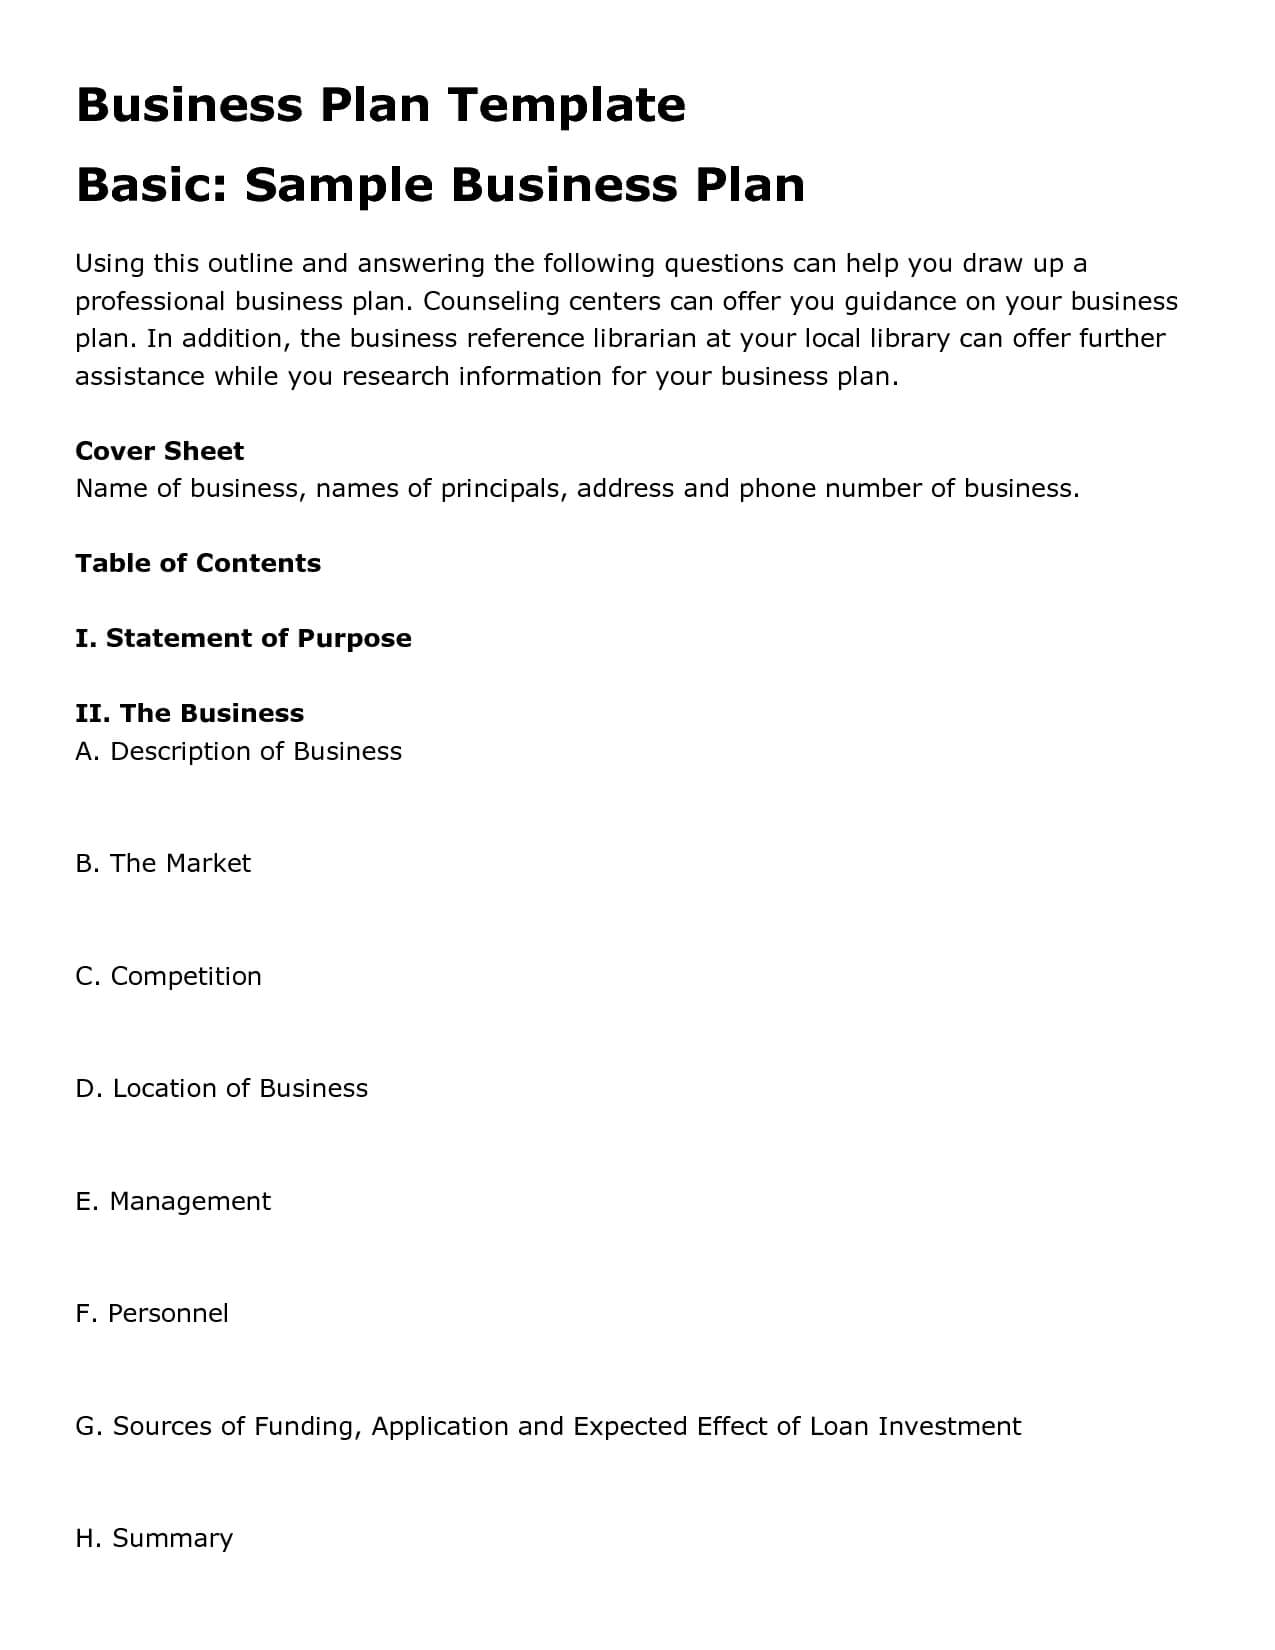 Business Plan Template For Students Plans Basic Pdf World Of With Regard To Buisness Plan Template